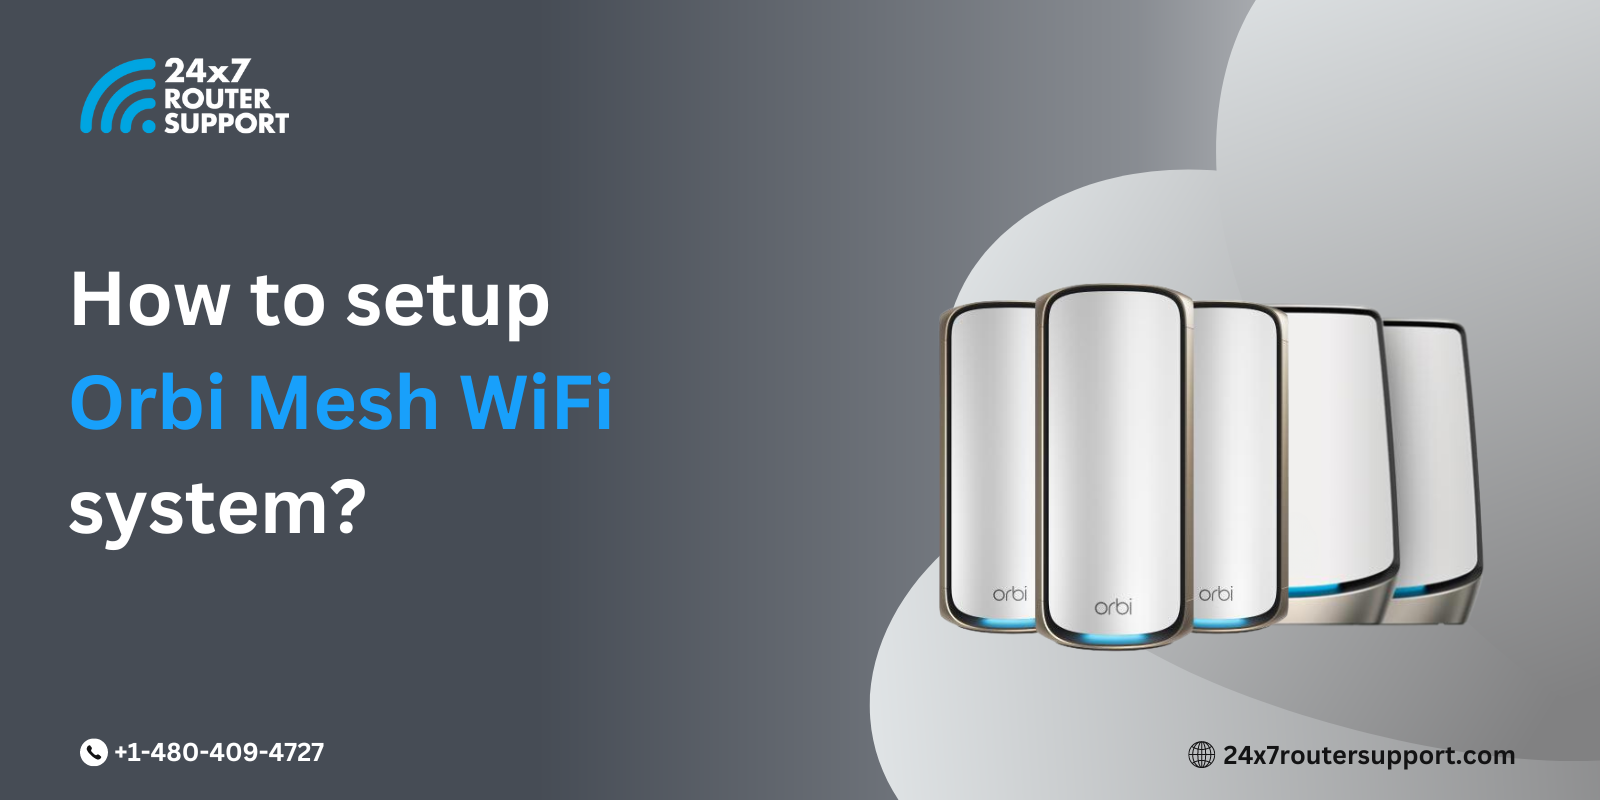 How to set up the Orbi Mesh wifi system?